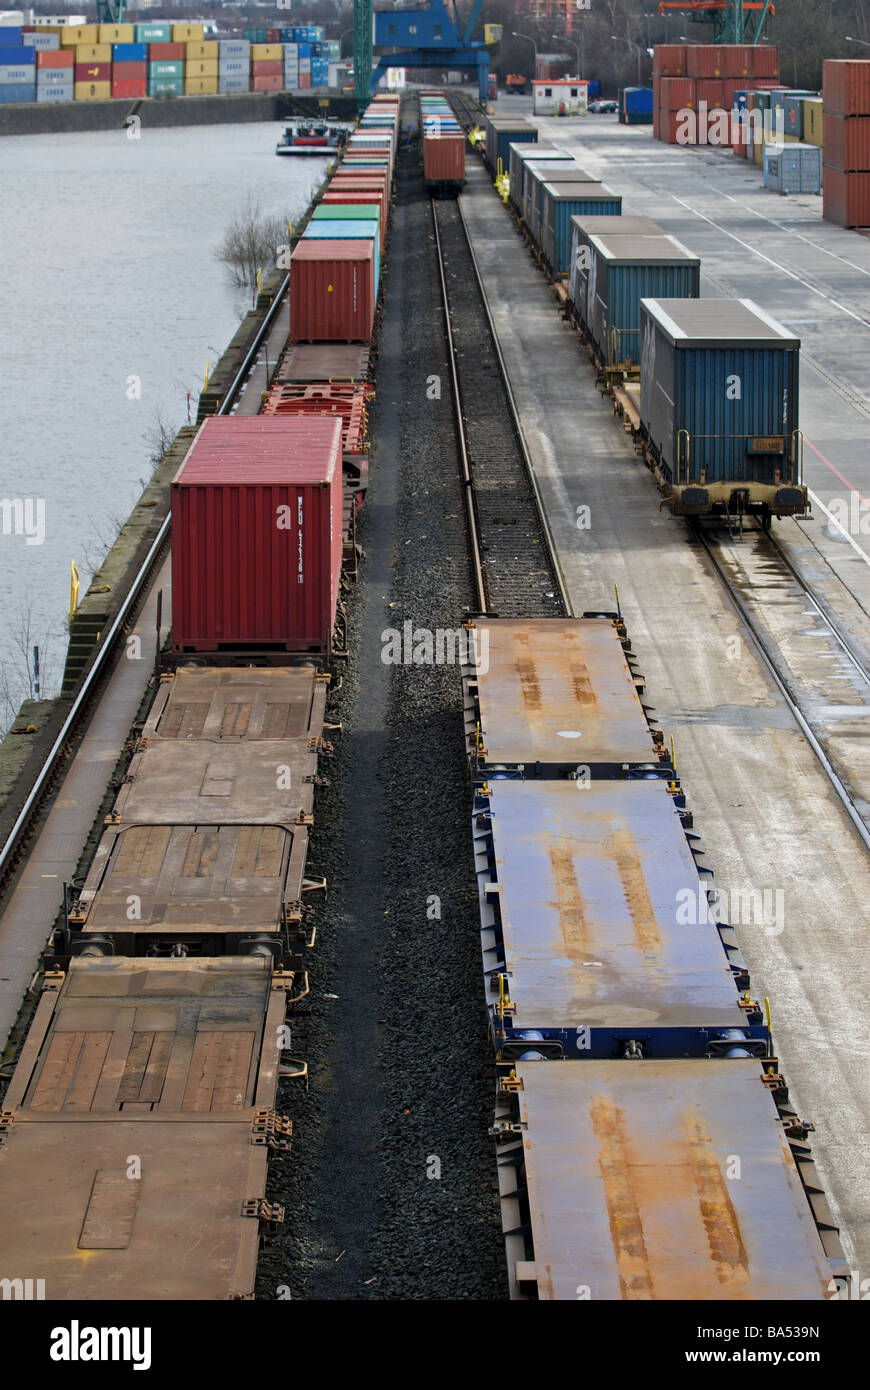 Rail freight container terminal, Germany. Stock Photo